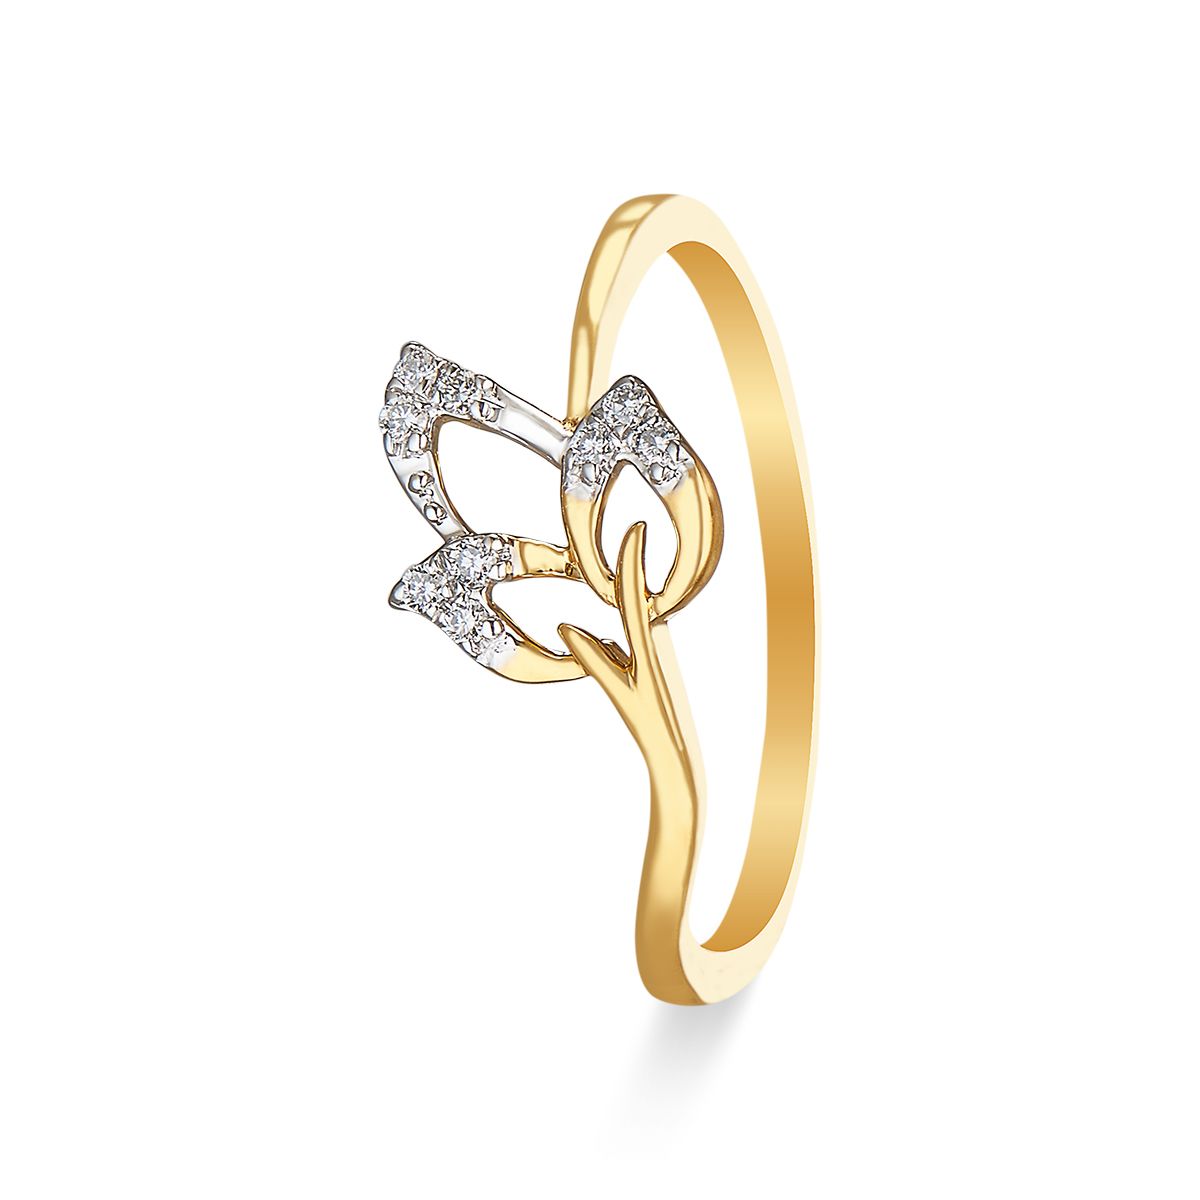 Buy Classy and Trendy Ring | Gold Plated Jewelry – PALMONAS